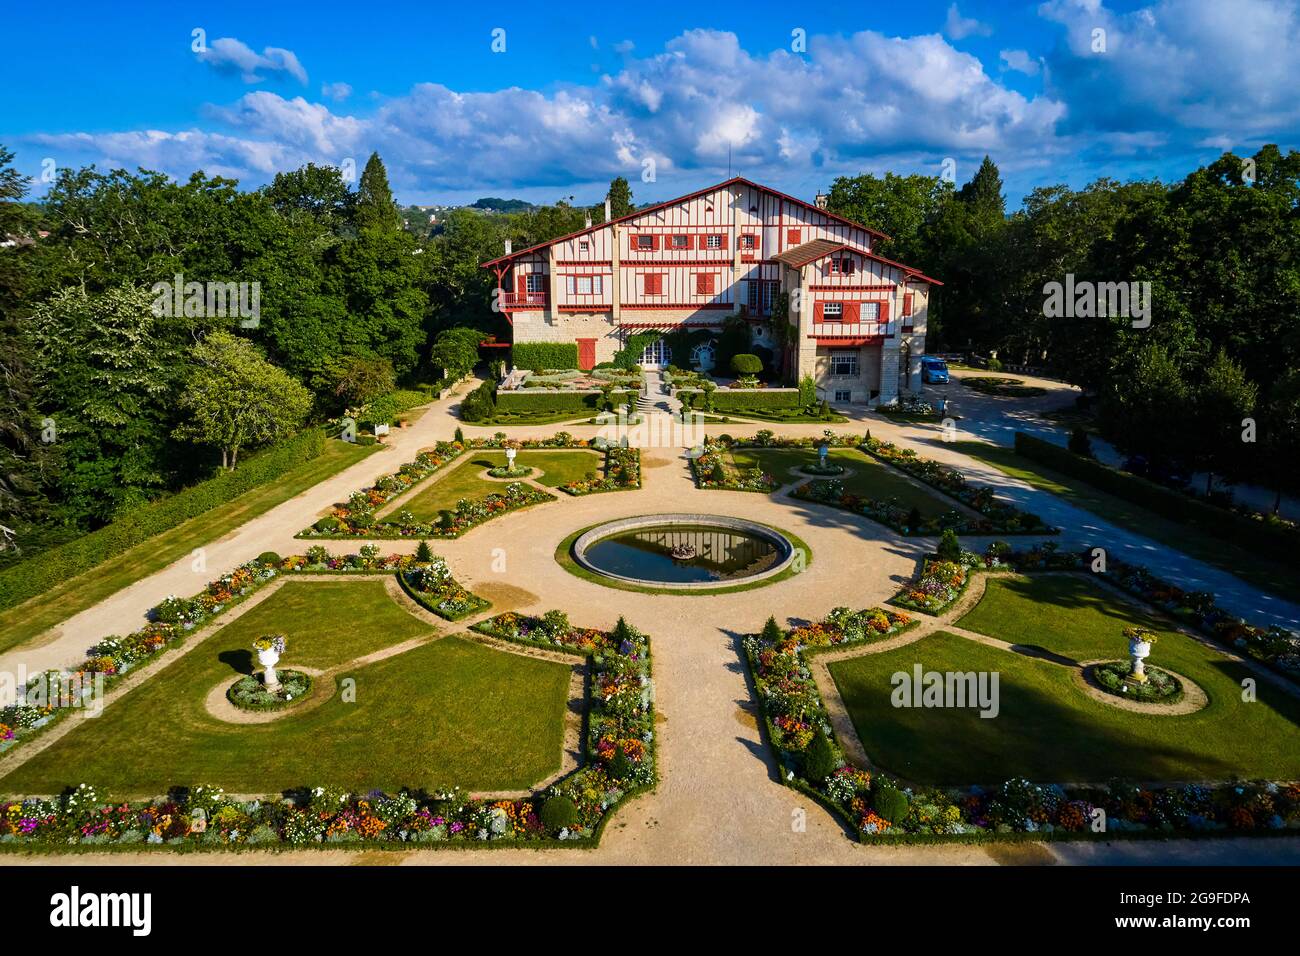 France, Pyrenees-Atlantiques, Basque Country, Cambo-les-Bains, Villa Arnaga and its formal garden, museum and house of Edmond Rostand in neo-Basque st Stock Photo